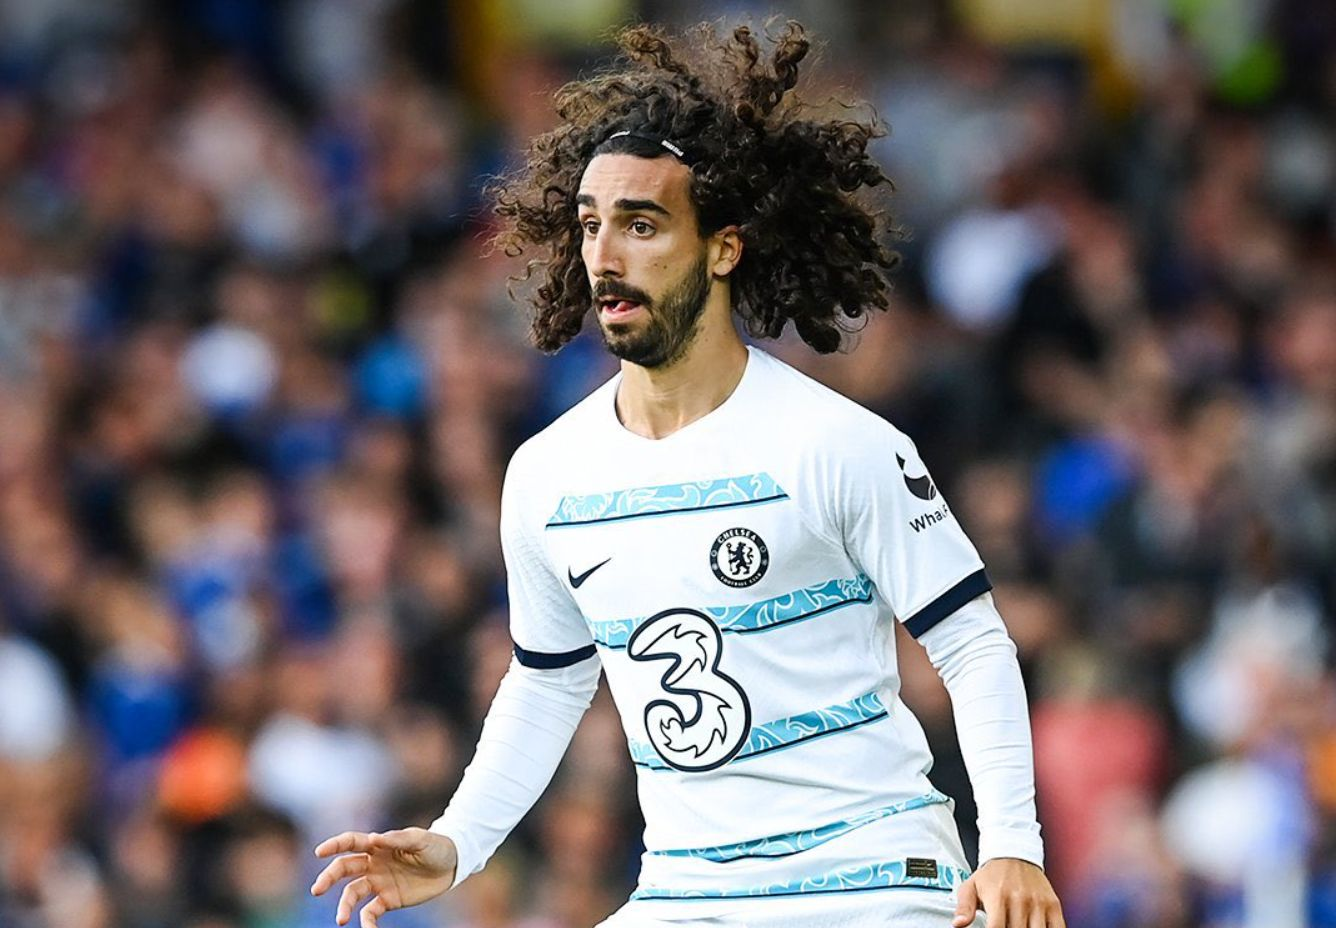 Marc Cucurella says he will never cut his hair, even after what happened with Cristian Romero, and the new Chelsea player tells where he plays best.